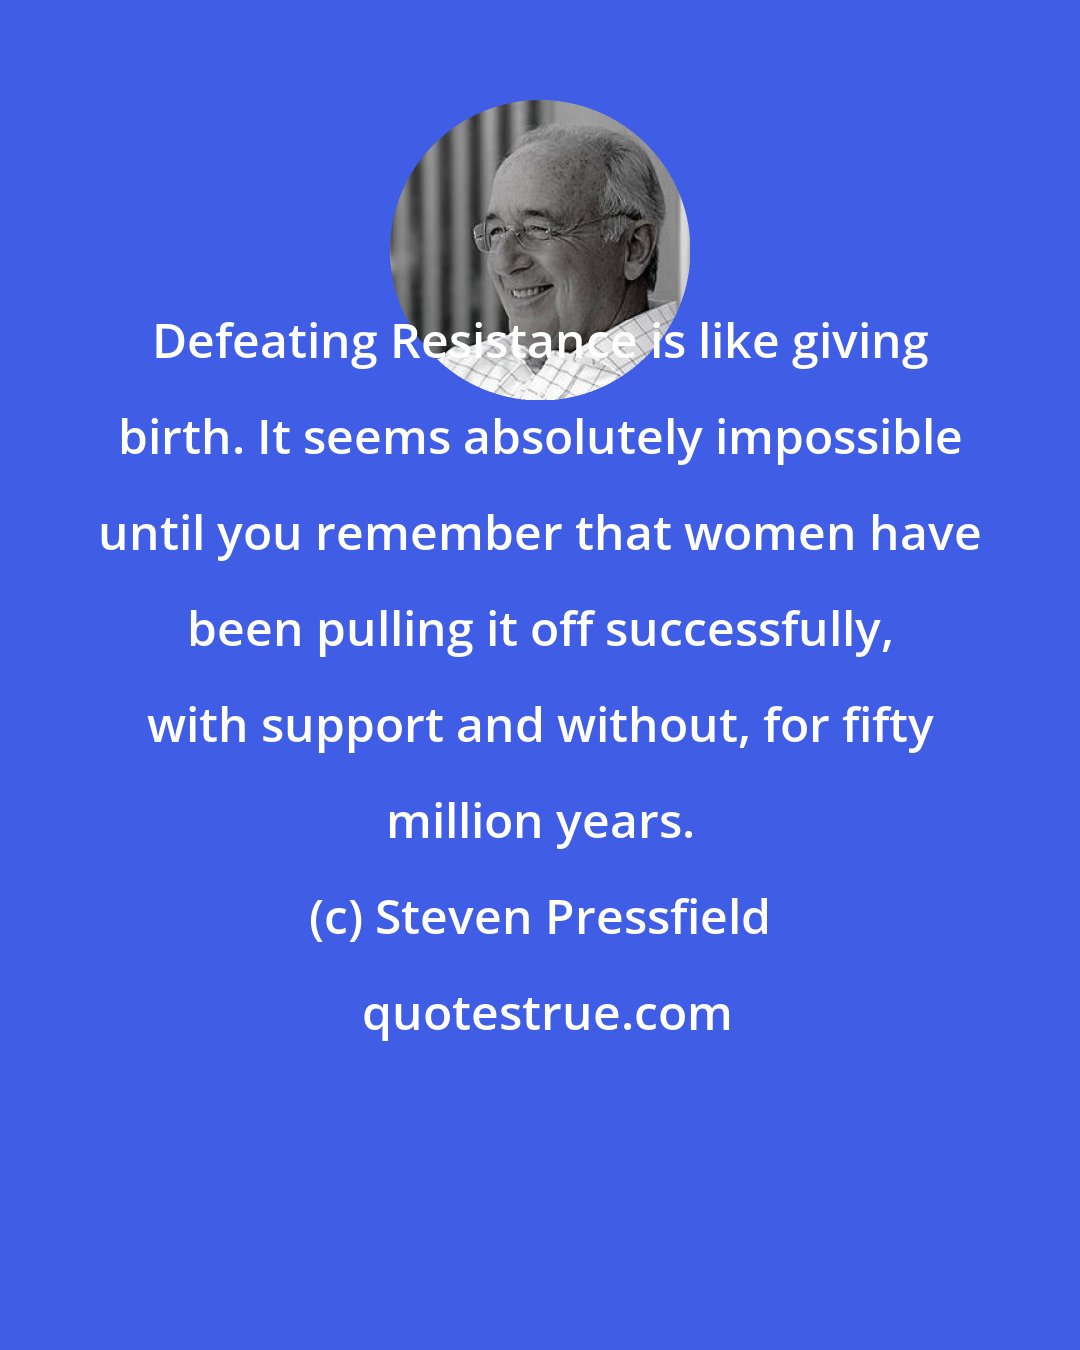 Steven Pressfield: Defeating Resistance is like giving birth. It seems absolutely impossible until you remember that women have been pulling it off successfully, with support and without, for fifty million years.